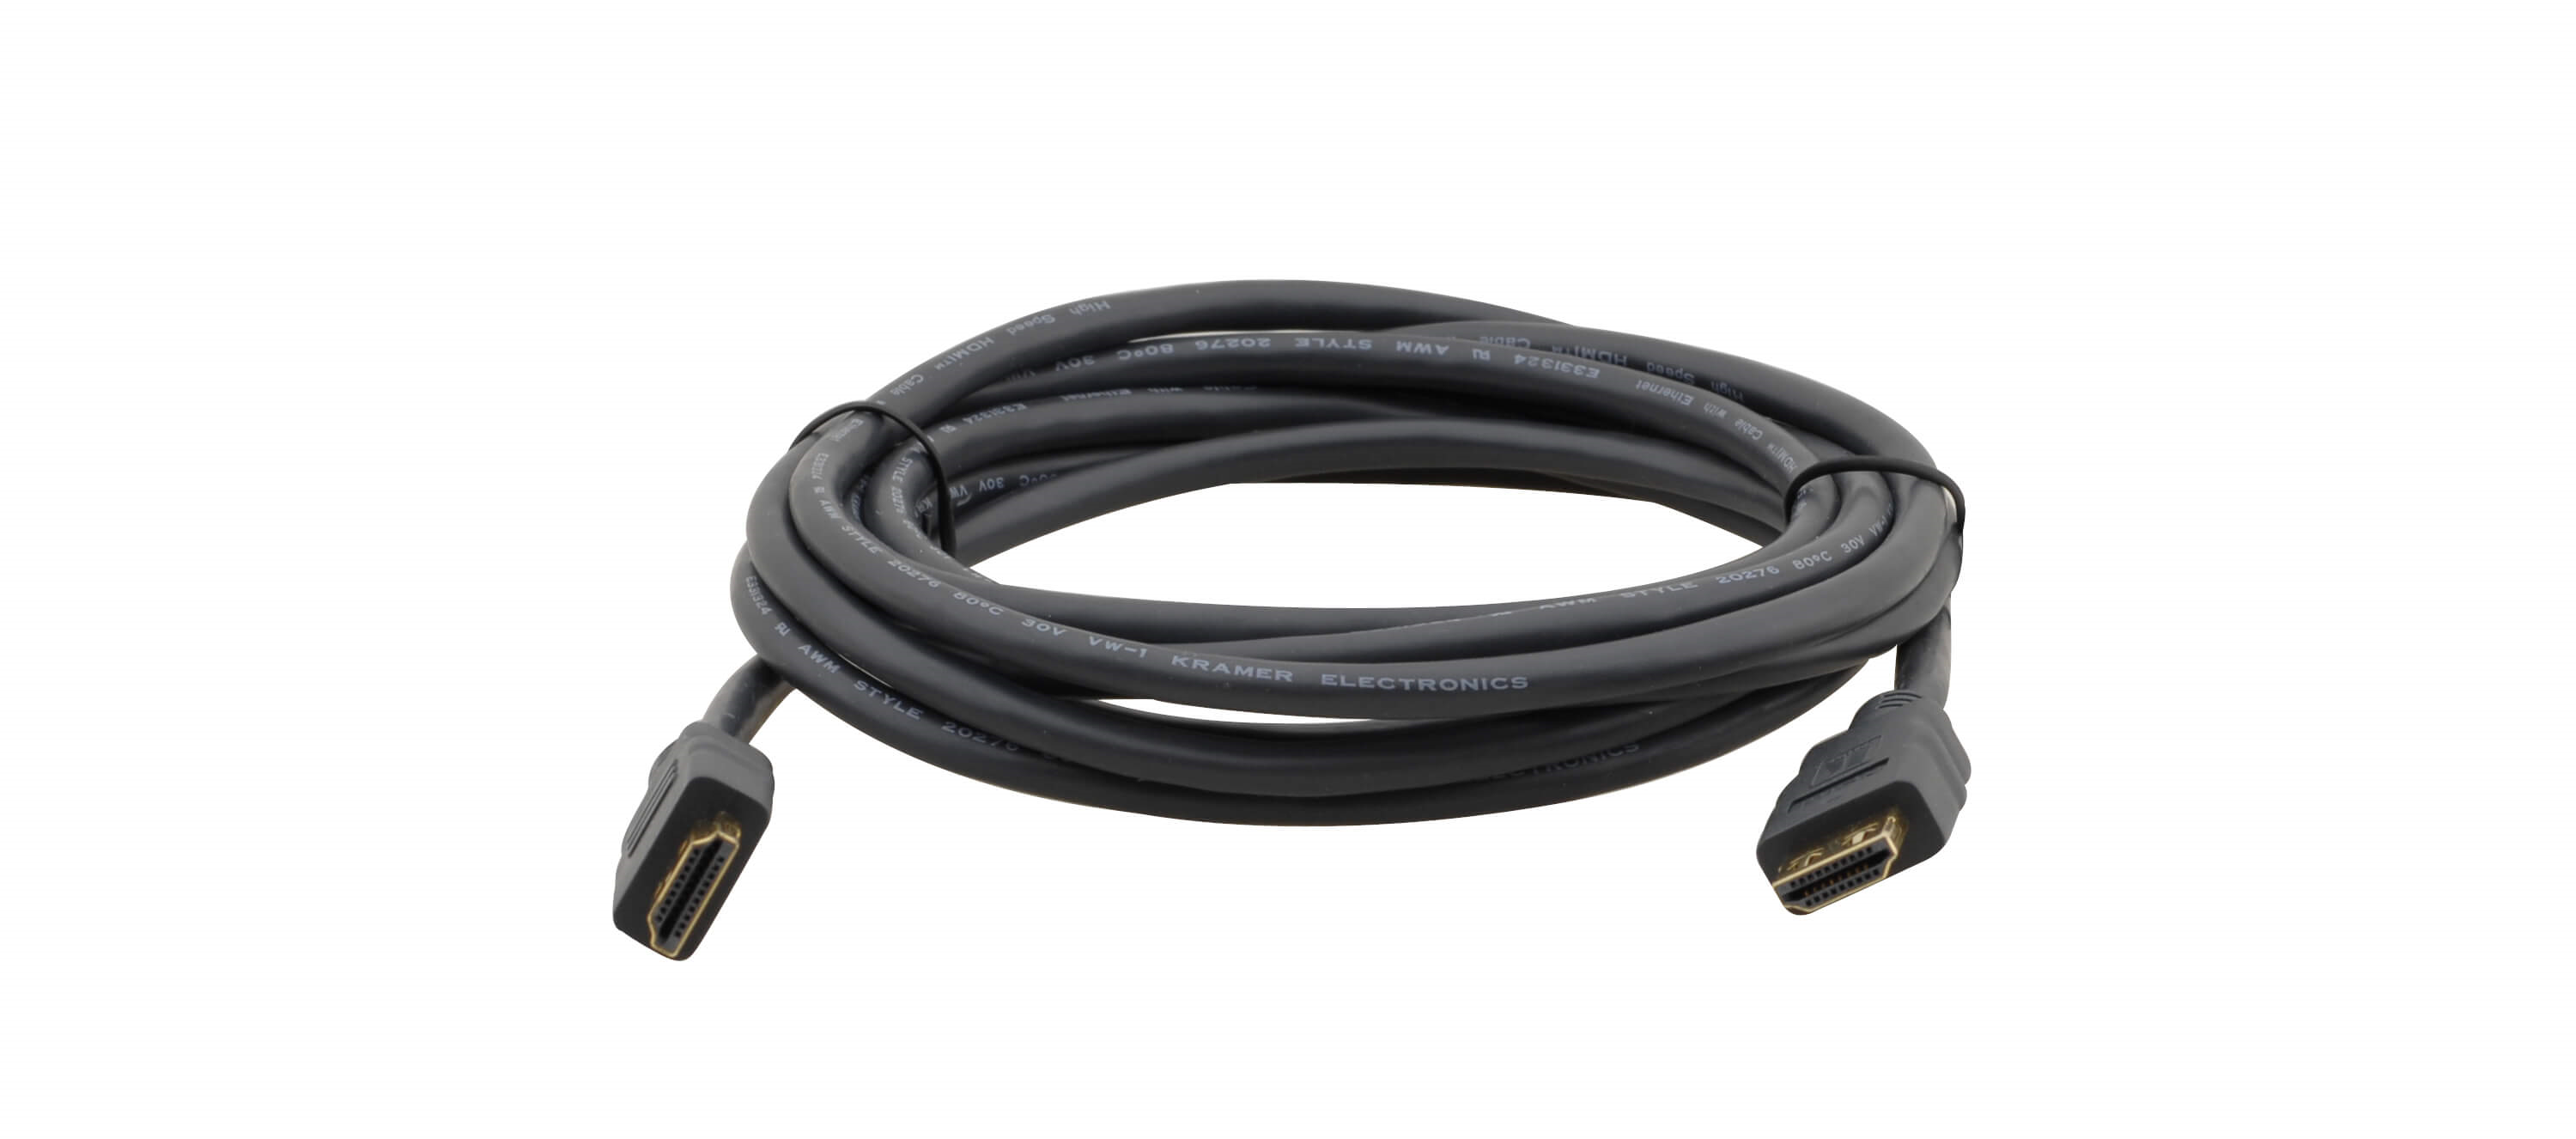 C-MHM/MHM-12 Flexible High–Speed HDMI Cable with Ethernet - 12'